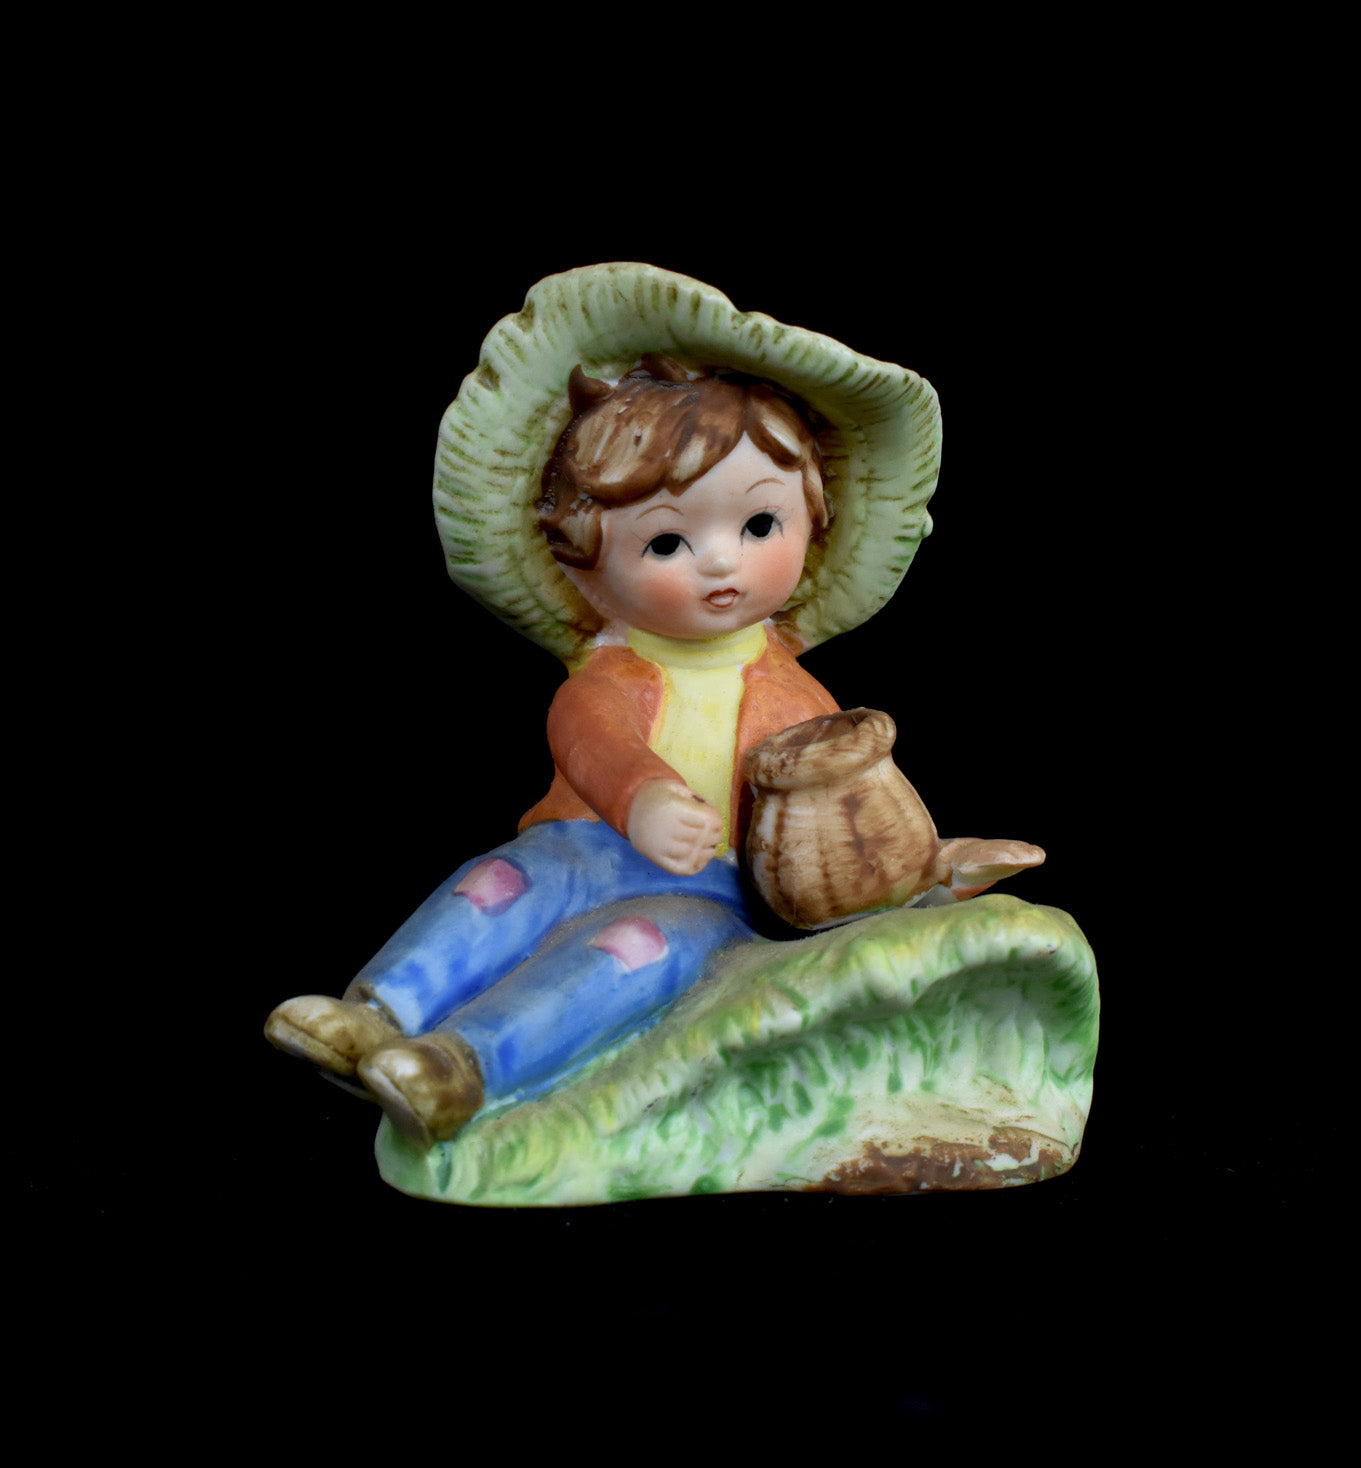 Ceramic Figure Young Boy 3 inch Figure Used